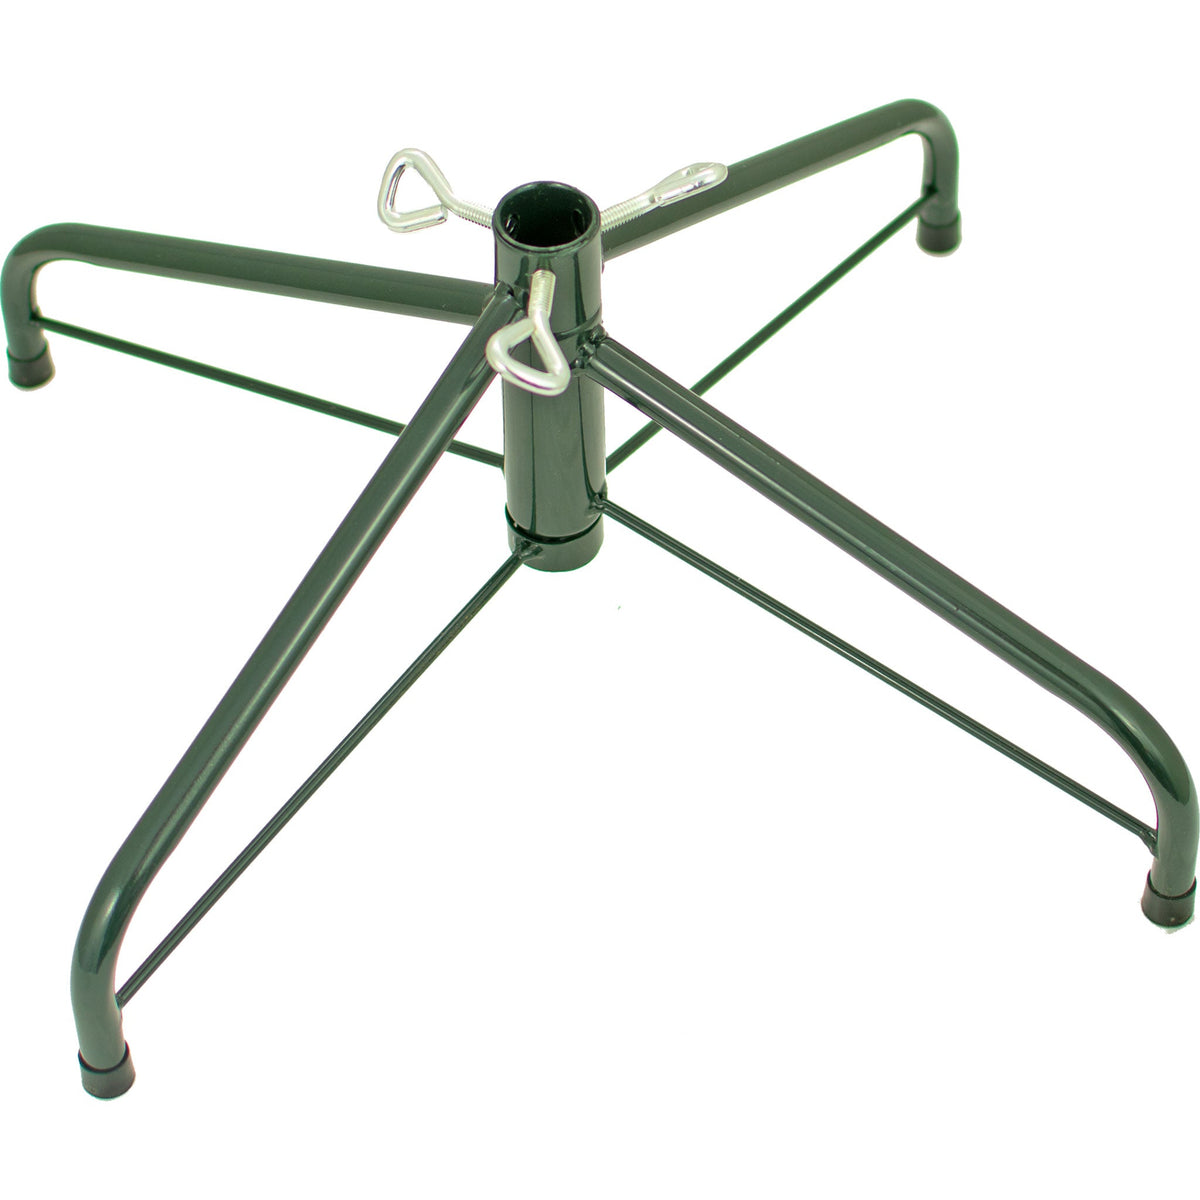 Tree Stands come in green metal and fold for easy convenience.